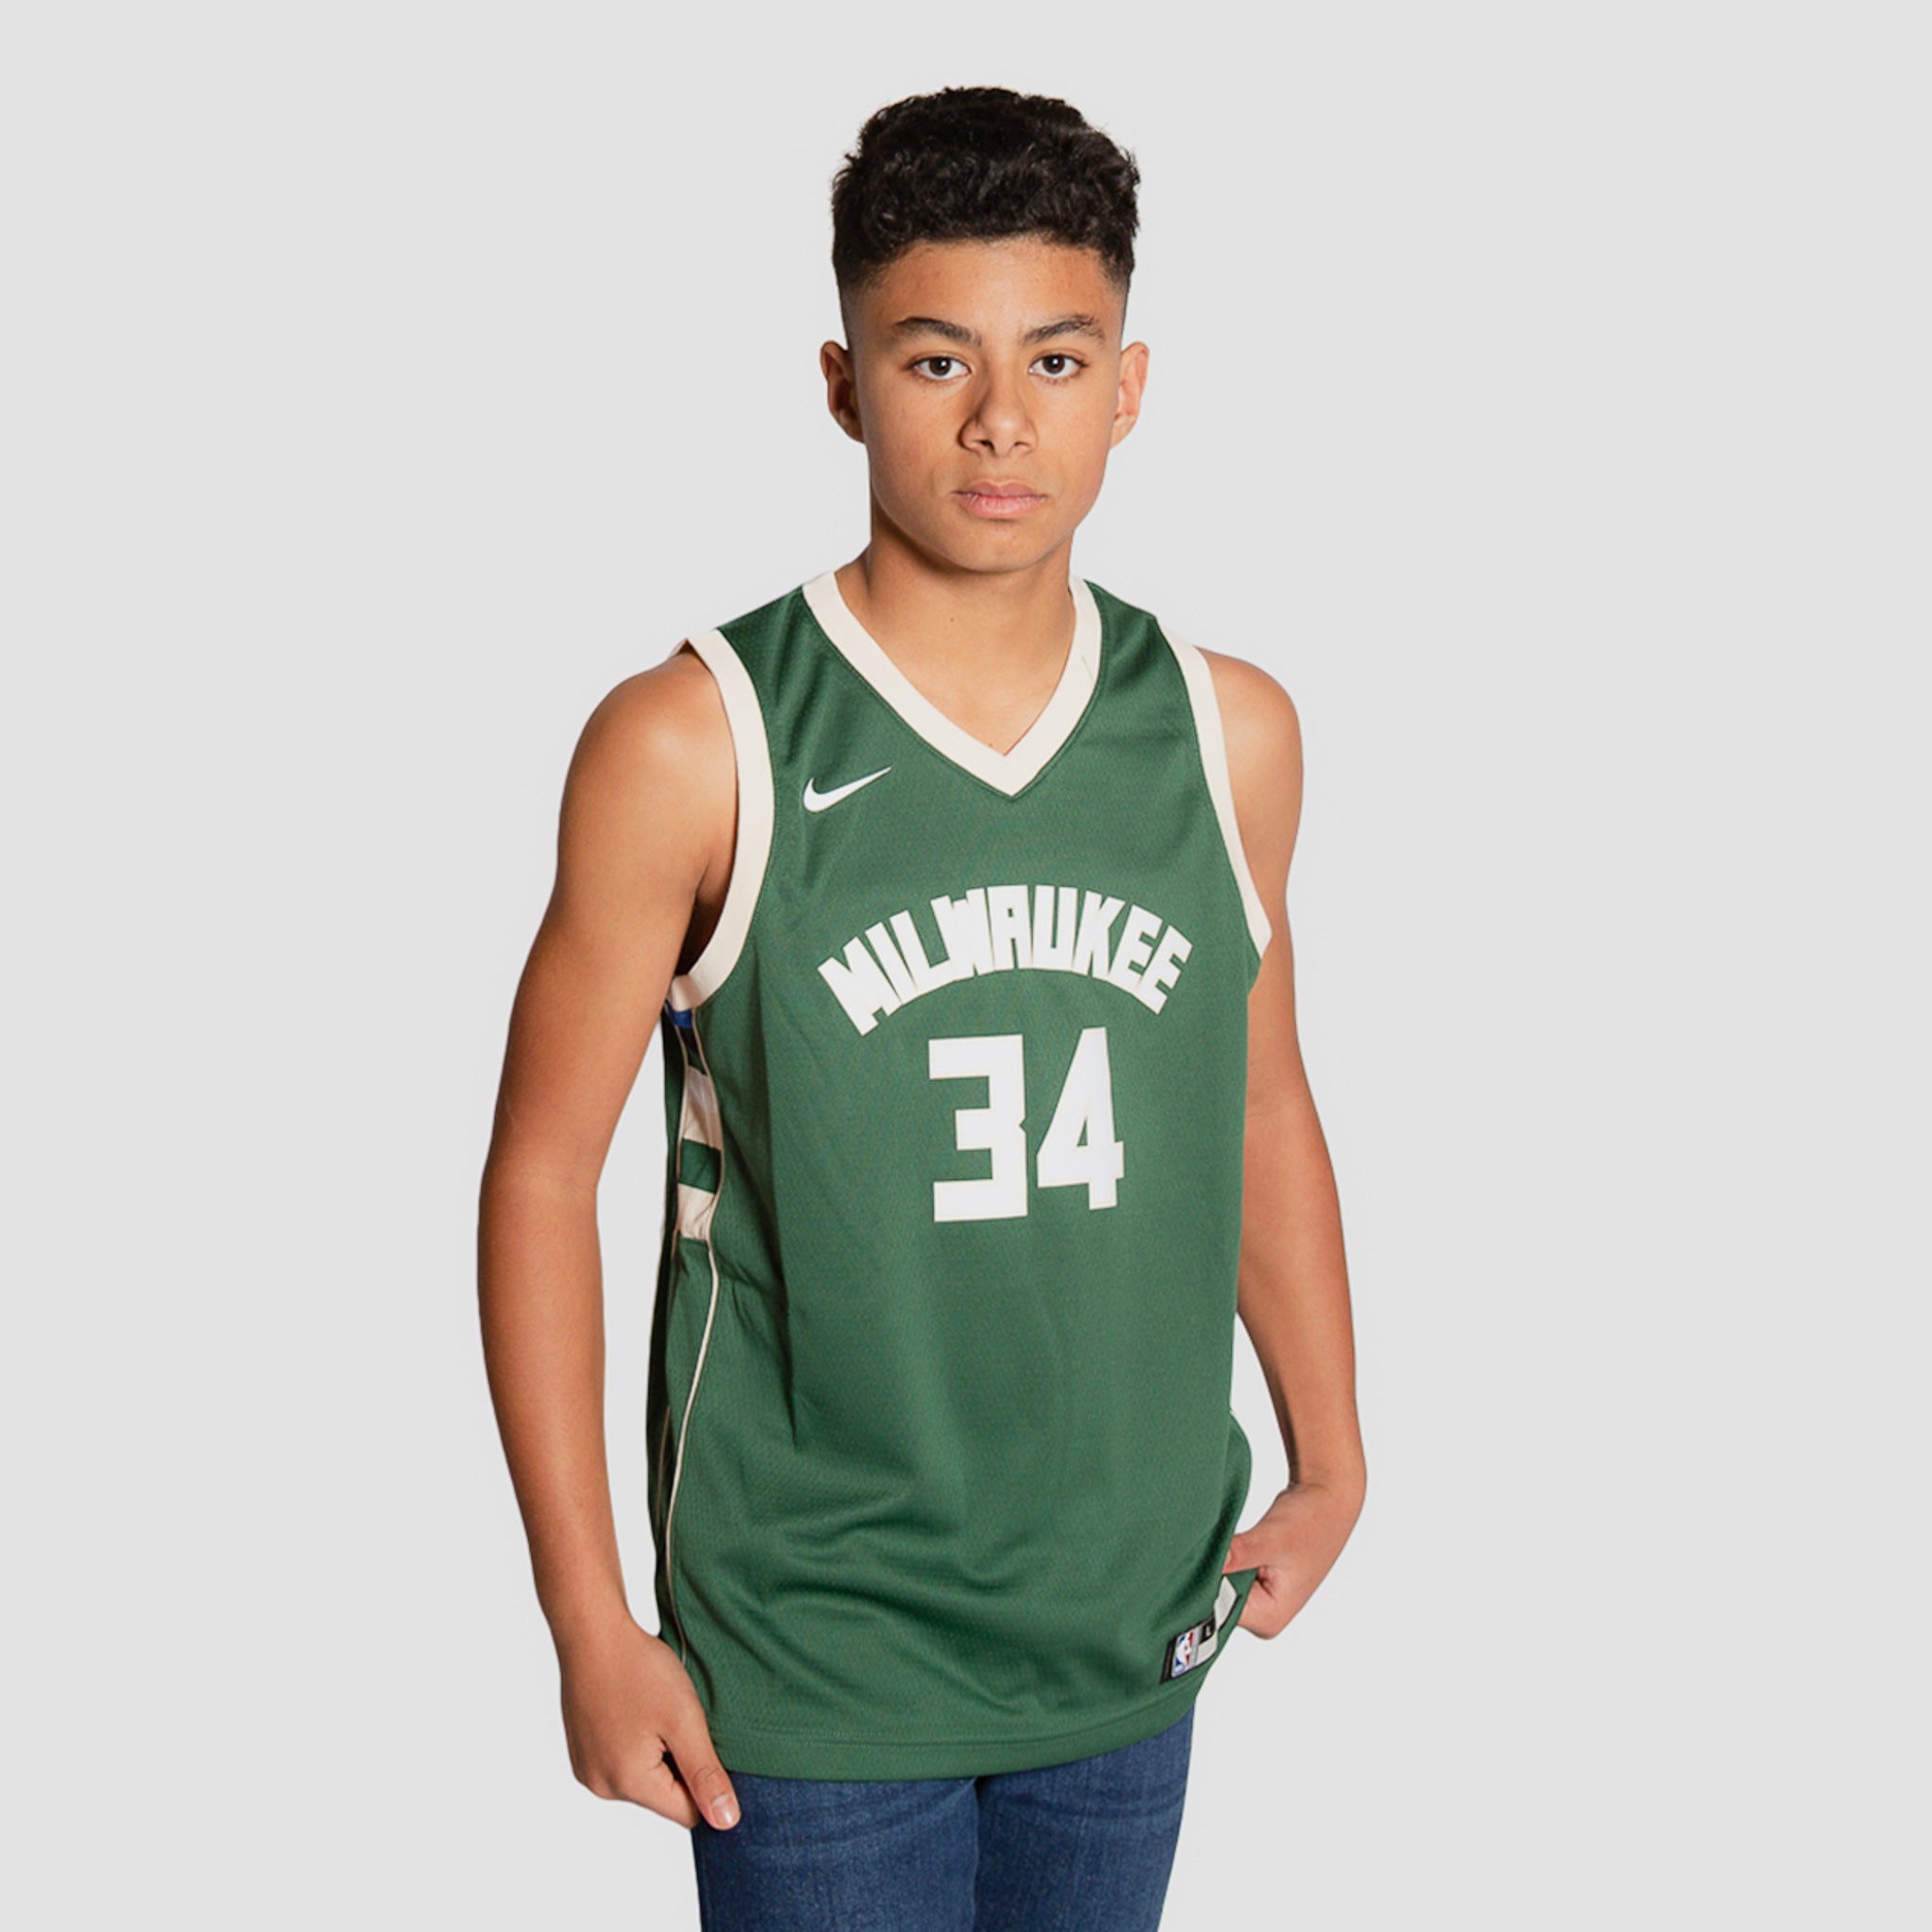 youth large giannis jersey